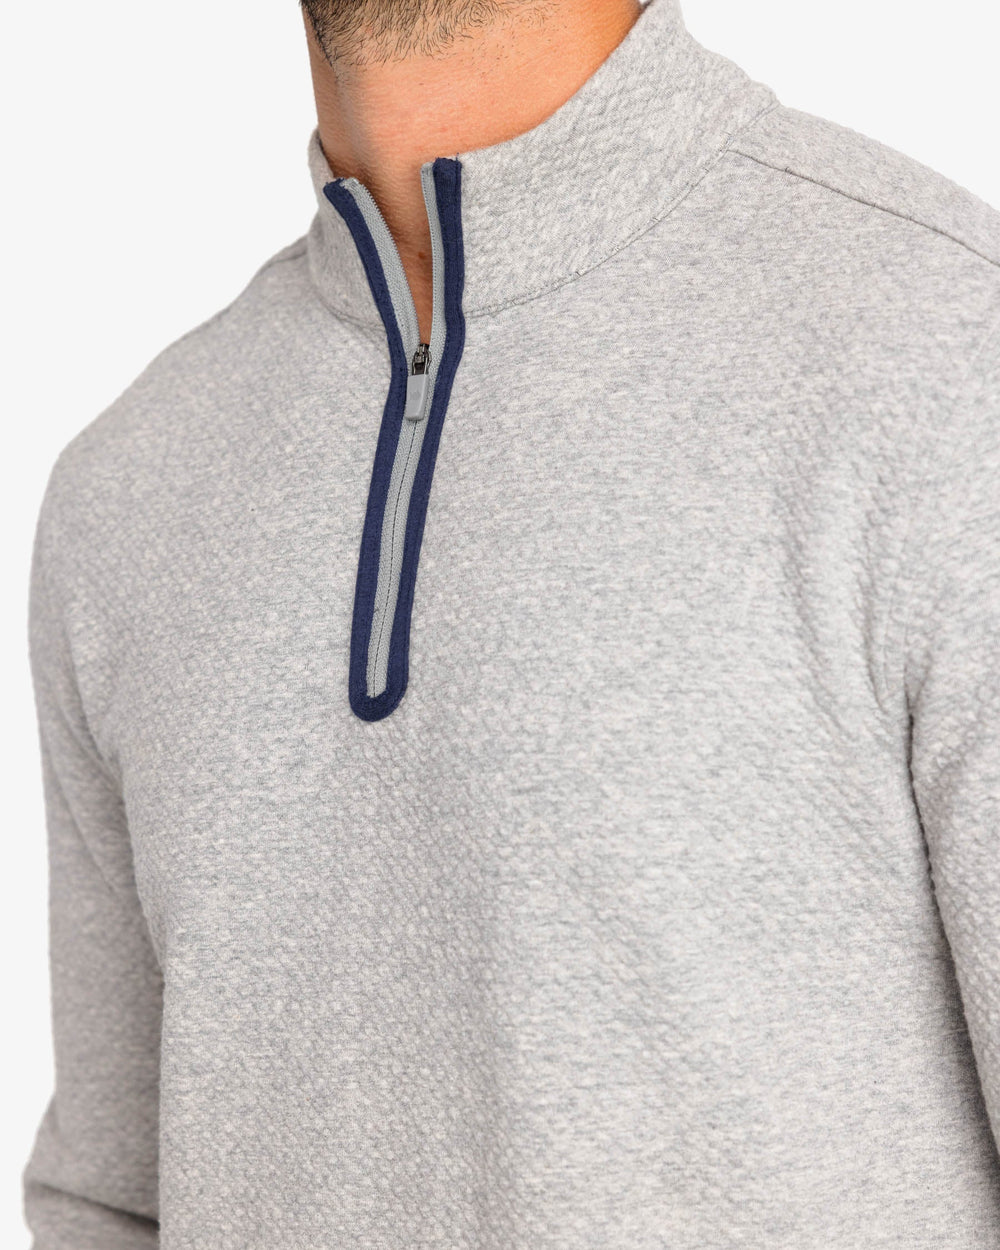 The detail view of the Outbound Quarter Zip Pullover by Southern Tide - Heather Mid Grey